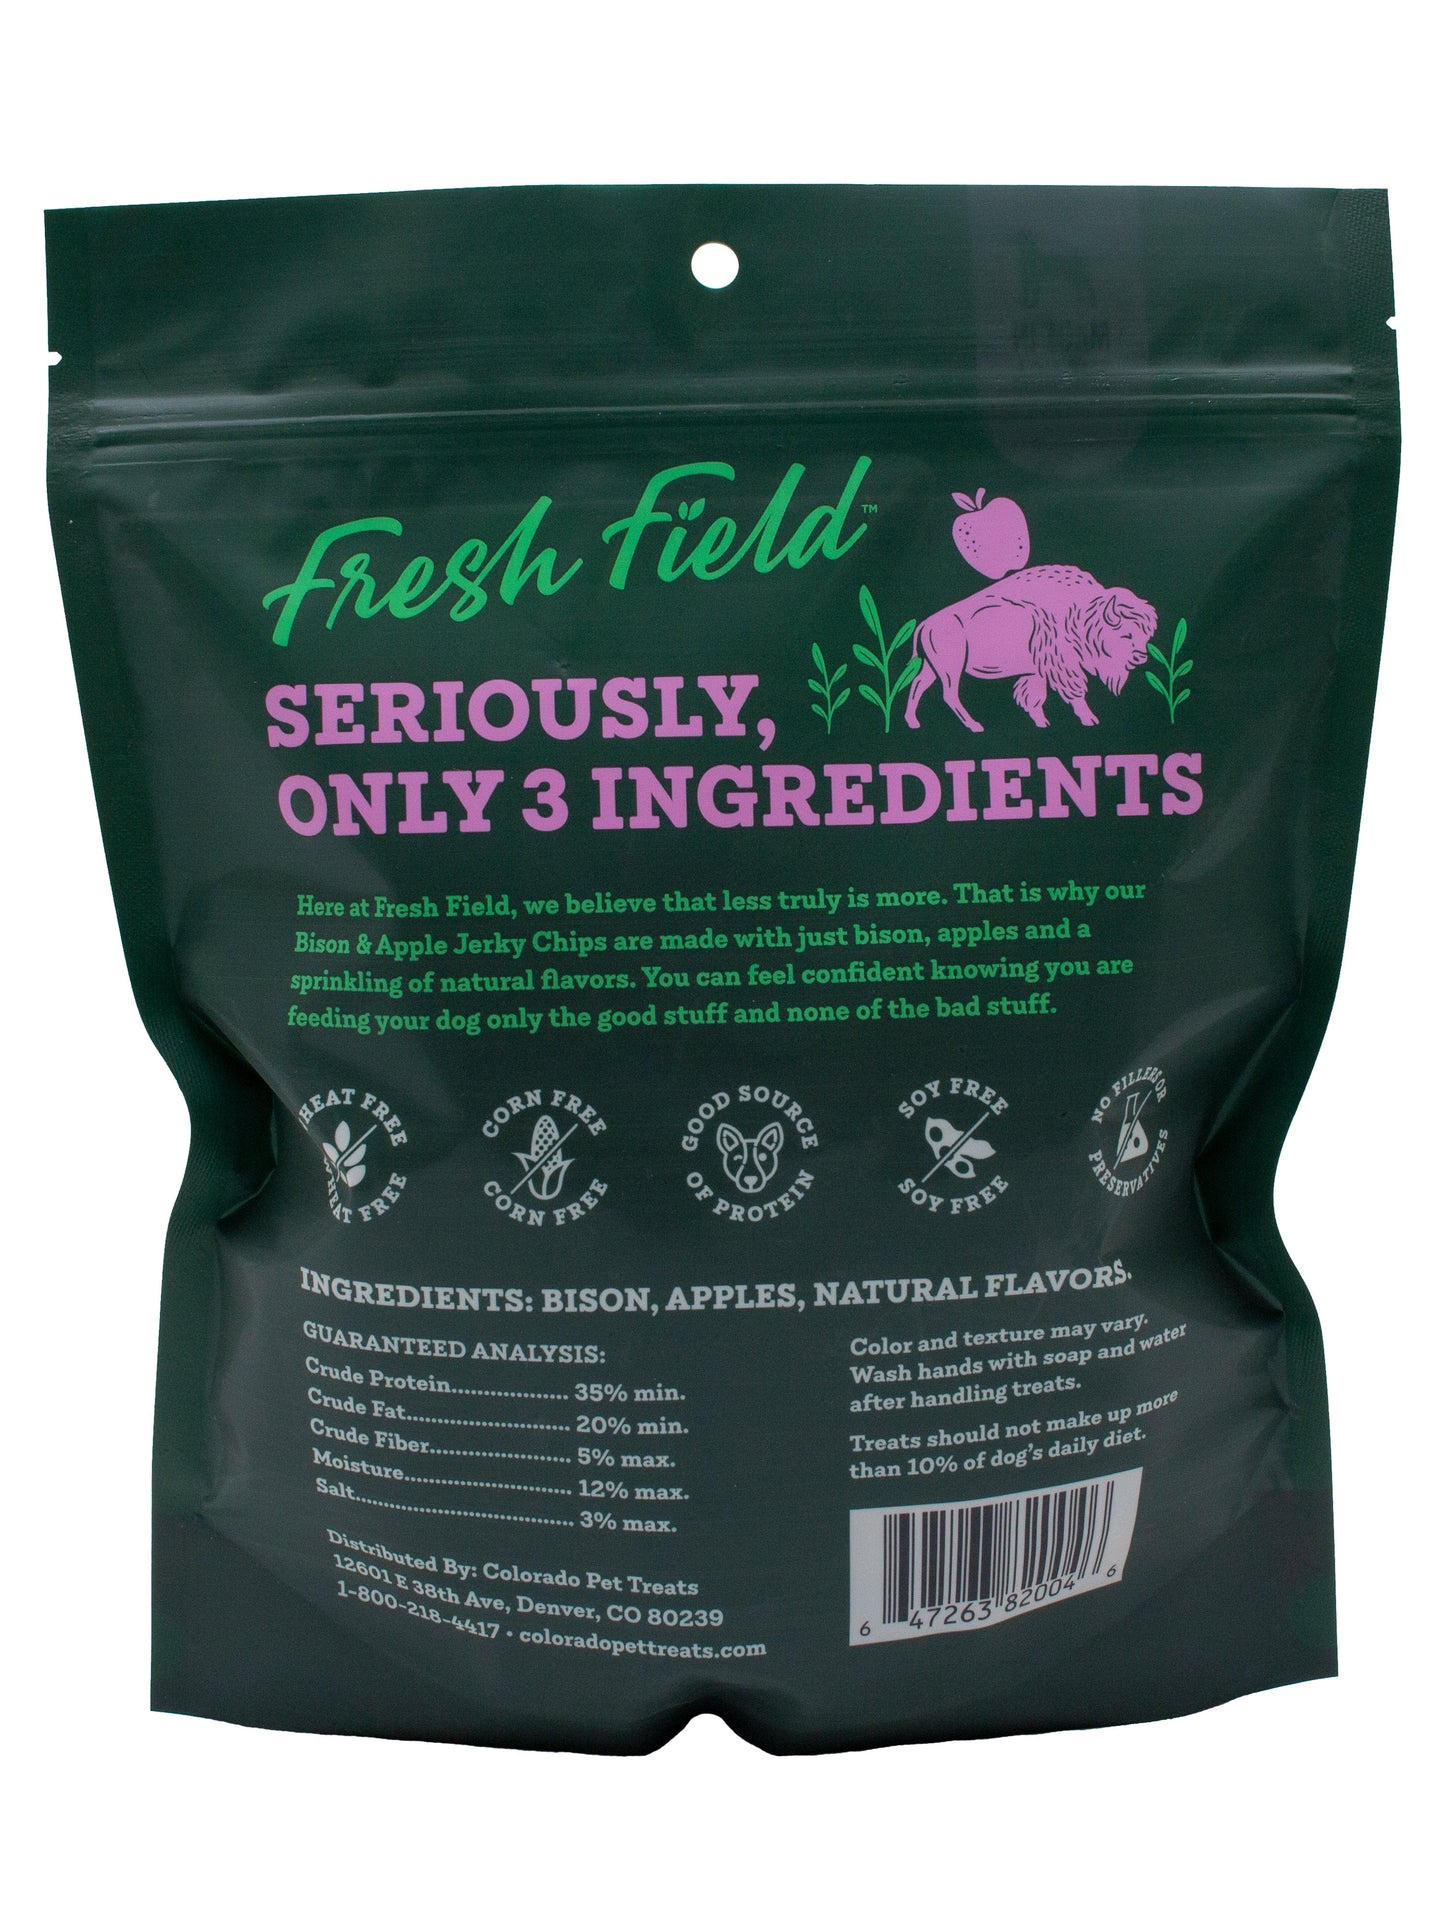 A photo of the back of the best 14 oz Bison and Apple Jerky Chips Dog Treats from Colorado Pet Treats by Fresh Field. Colorado Pet Treats - All-Natural, All-American Dog Jerky, Jerky Chips, and Bones - Treat your furry friend to our delicious and healthy pet treats made with only the finest ingredients sourced in the USA. The best crunchy and savory jerky chips made with all-natural ingredients and baked to perfection.